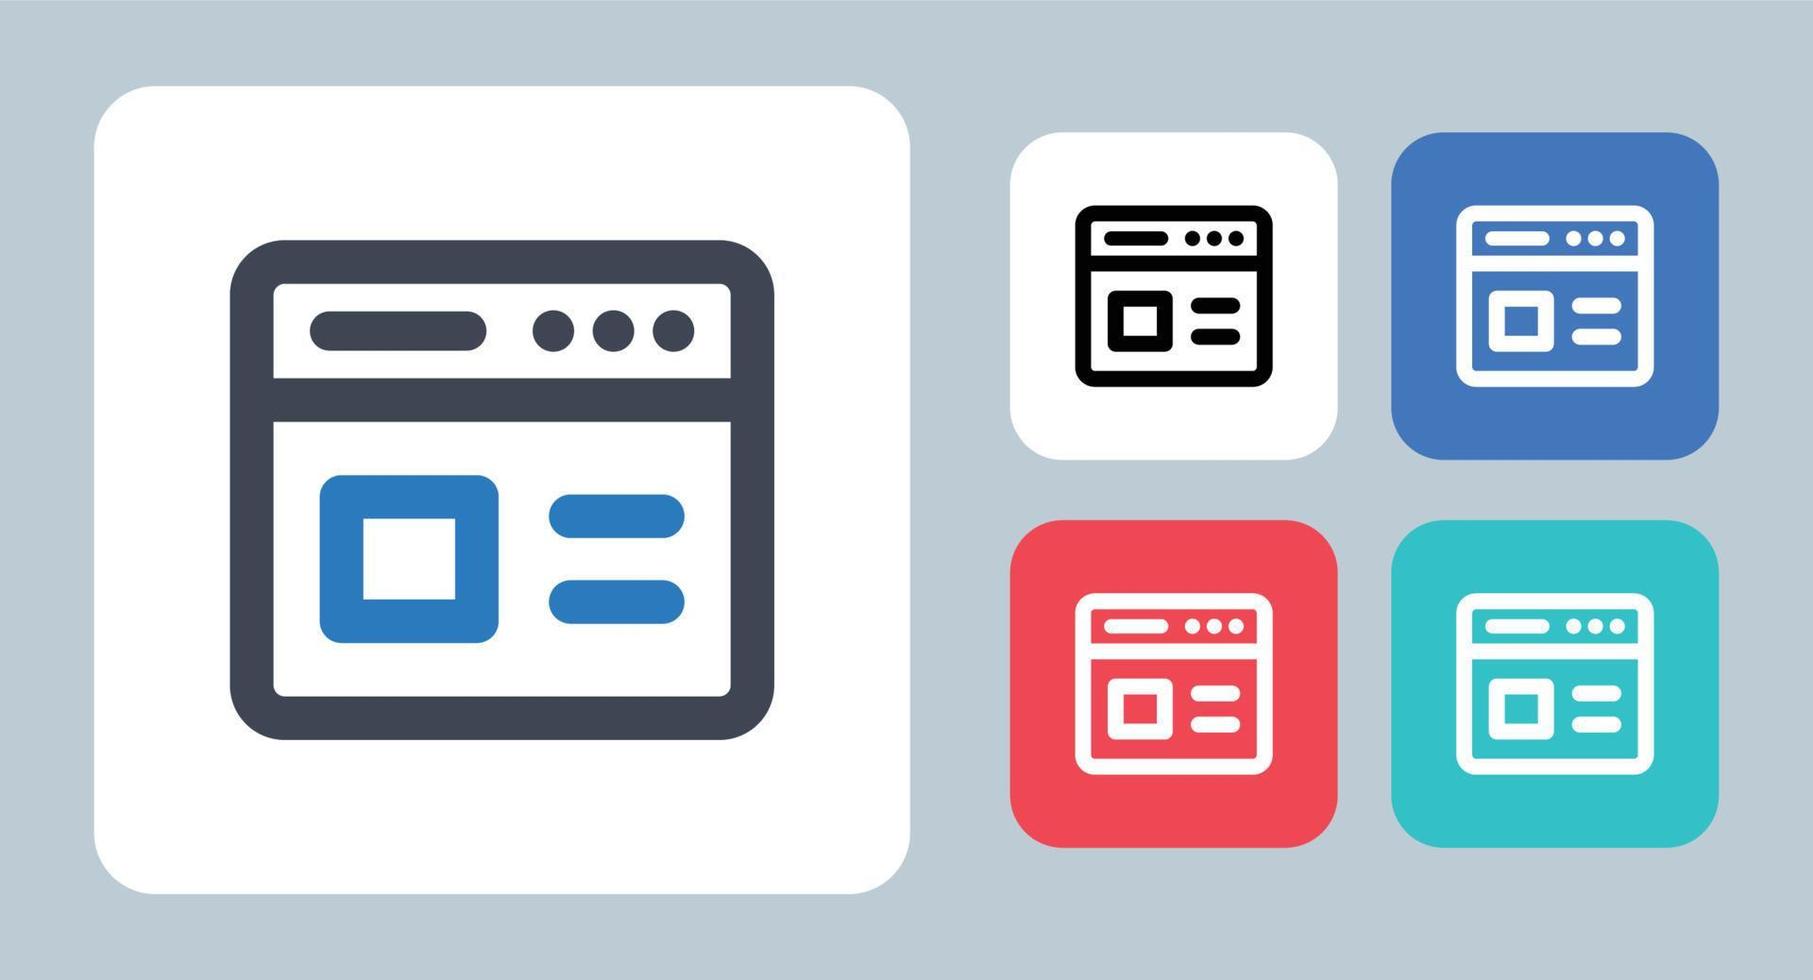 Website Layout icon - vector illustration . Web, Website, Layout, Browser, Window, Interface, Application, Content, line, outline, flat, icons .